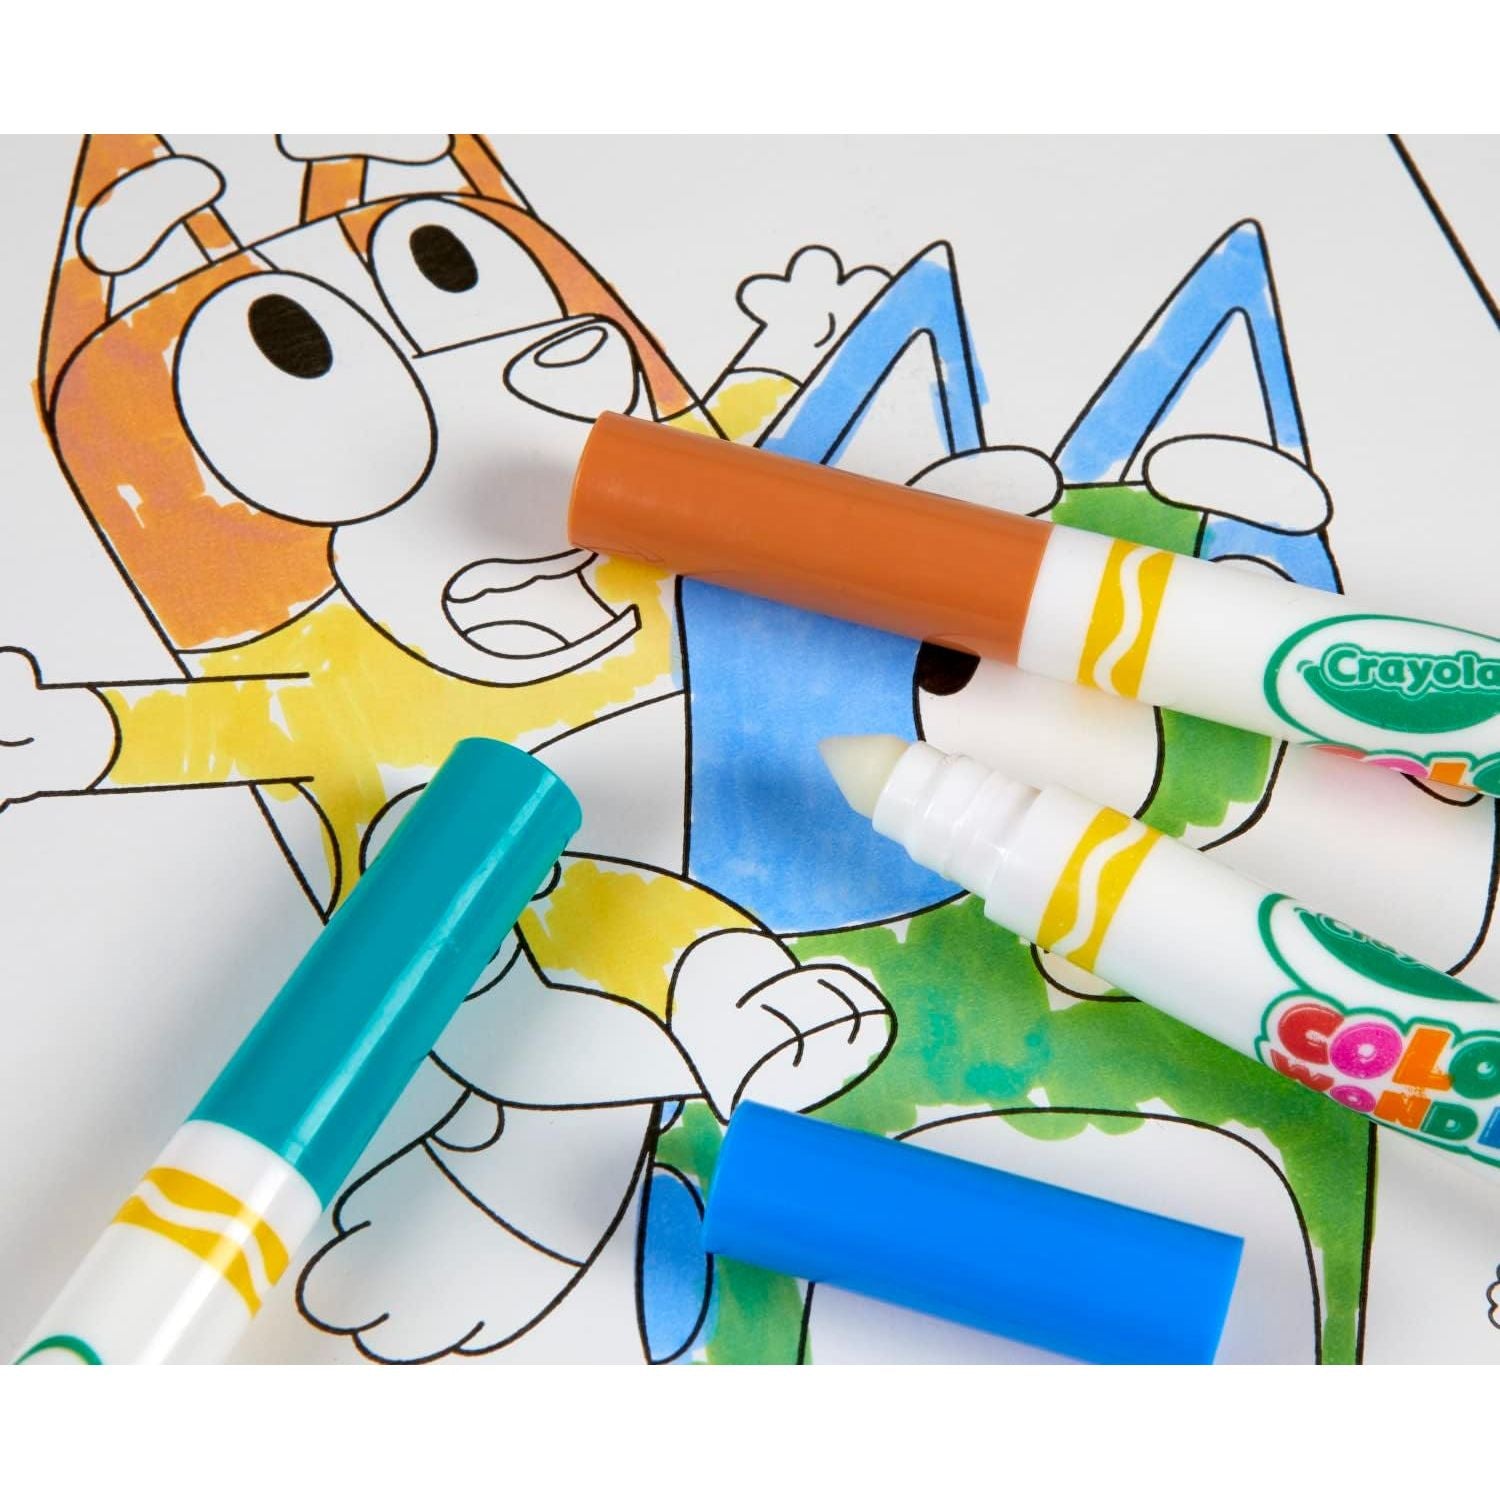 Crayola Bluey Color Wonder Coloring Book Pages & Markers, Mess Free Coloring, 18 Pages, Gift